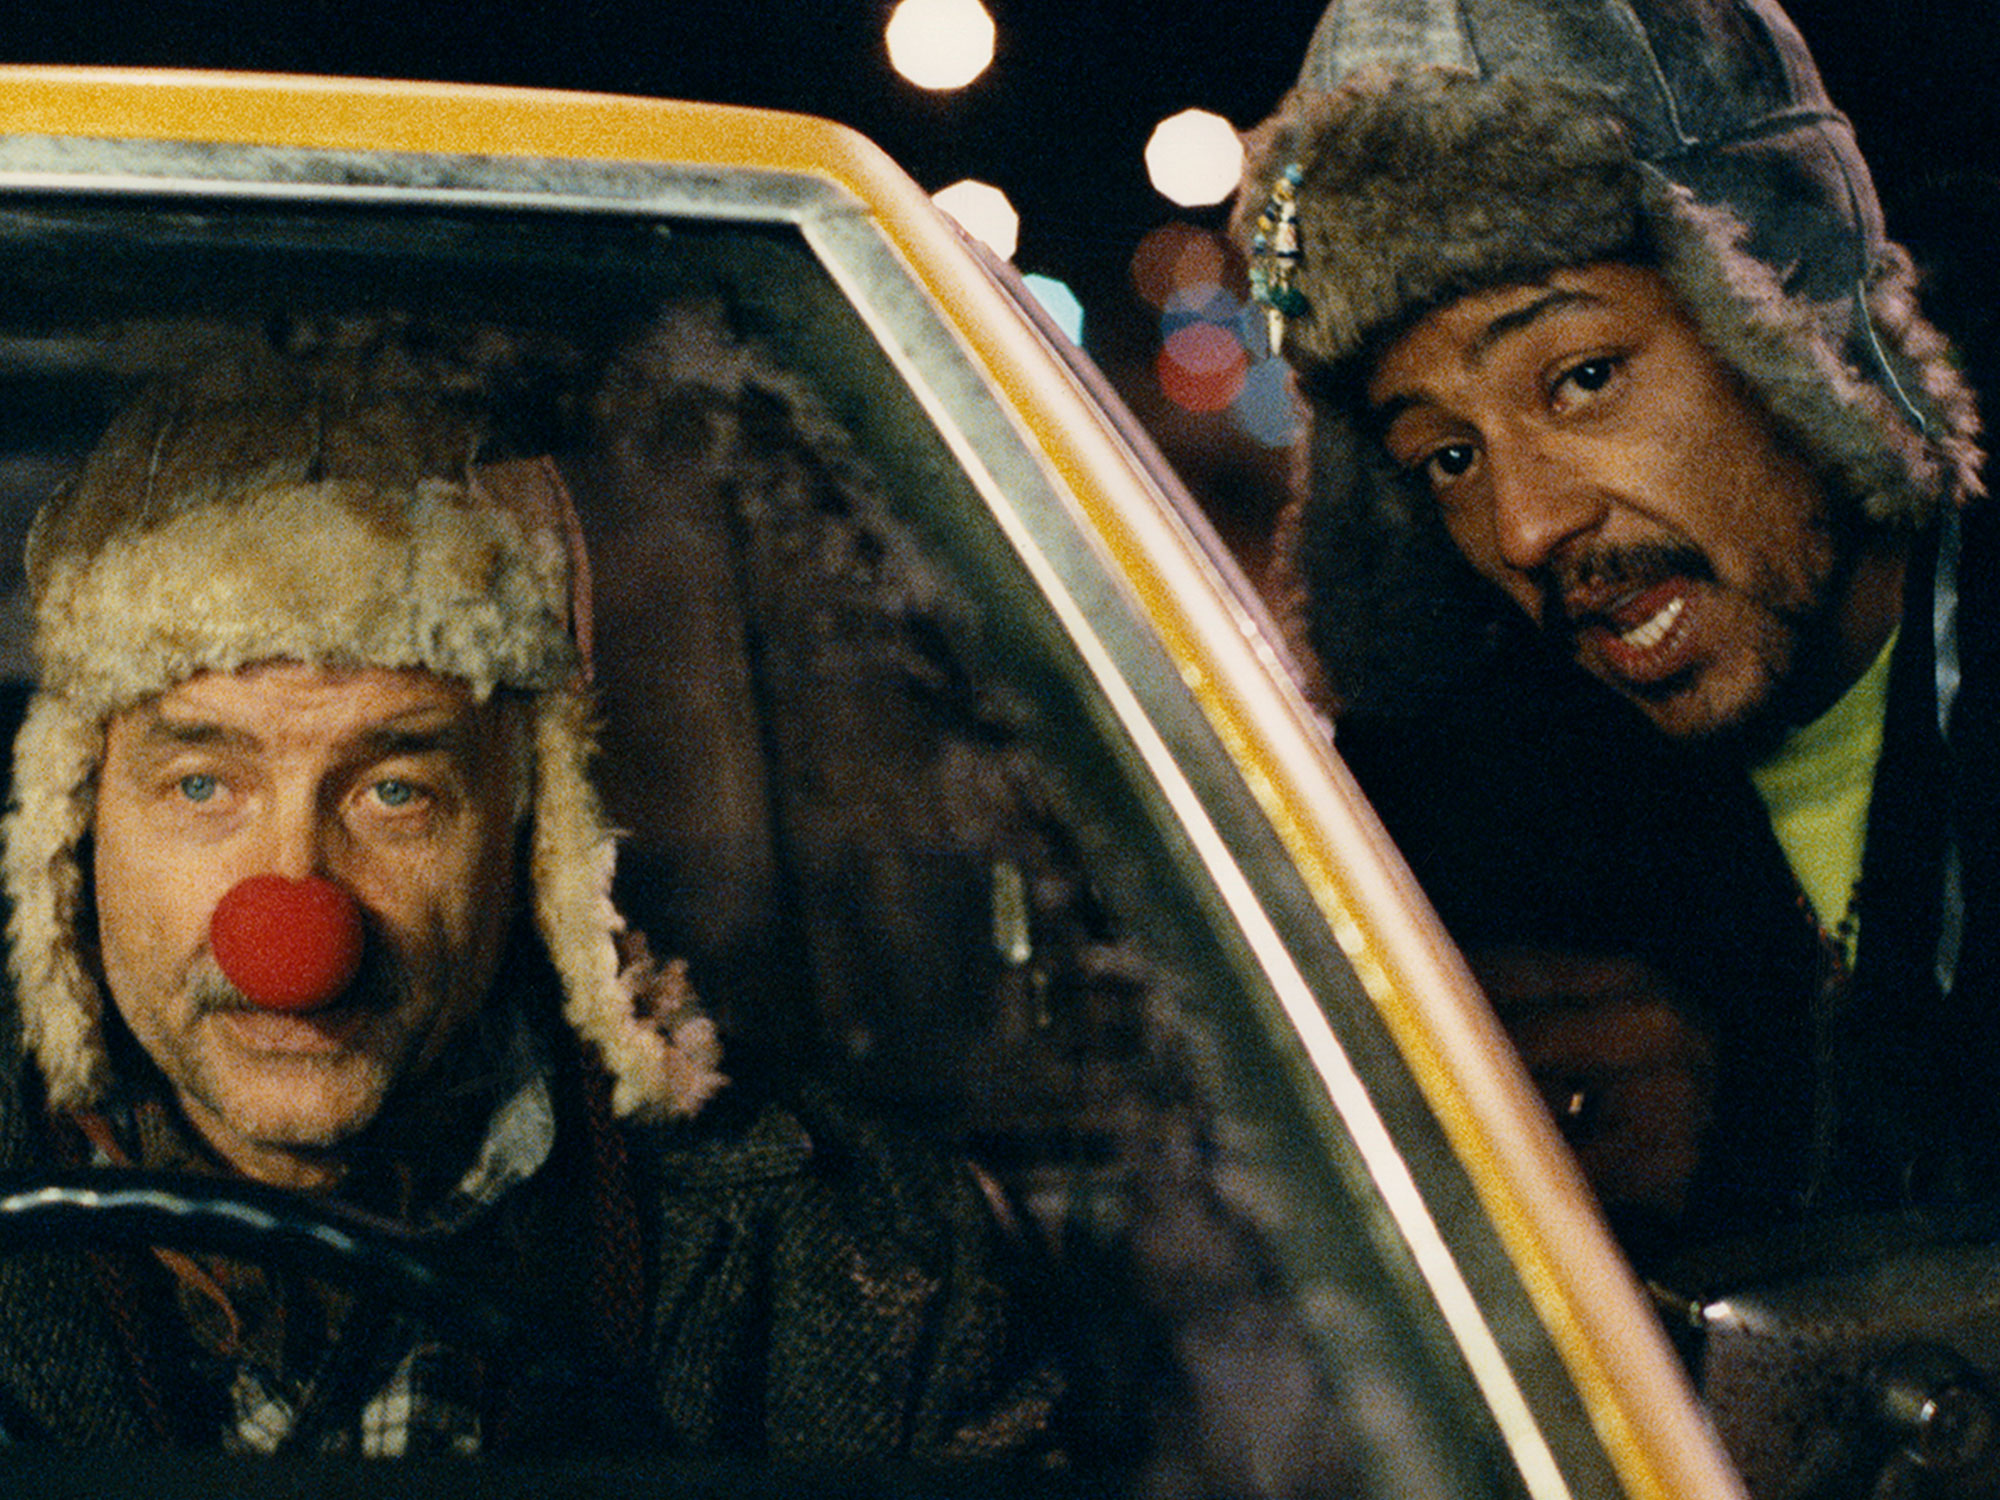 In praise of two hats in Jim Jarmusch's Night on Earth